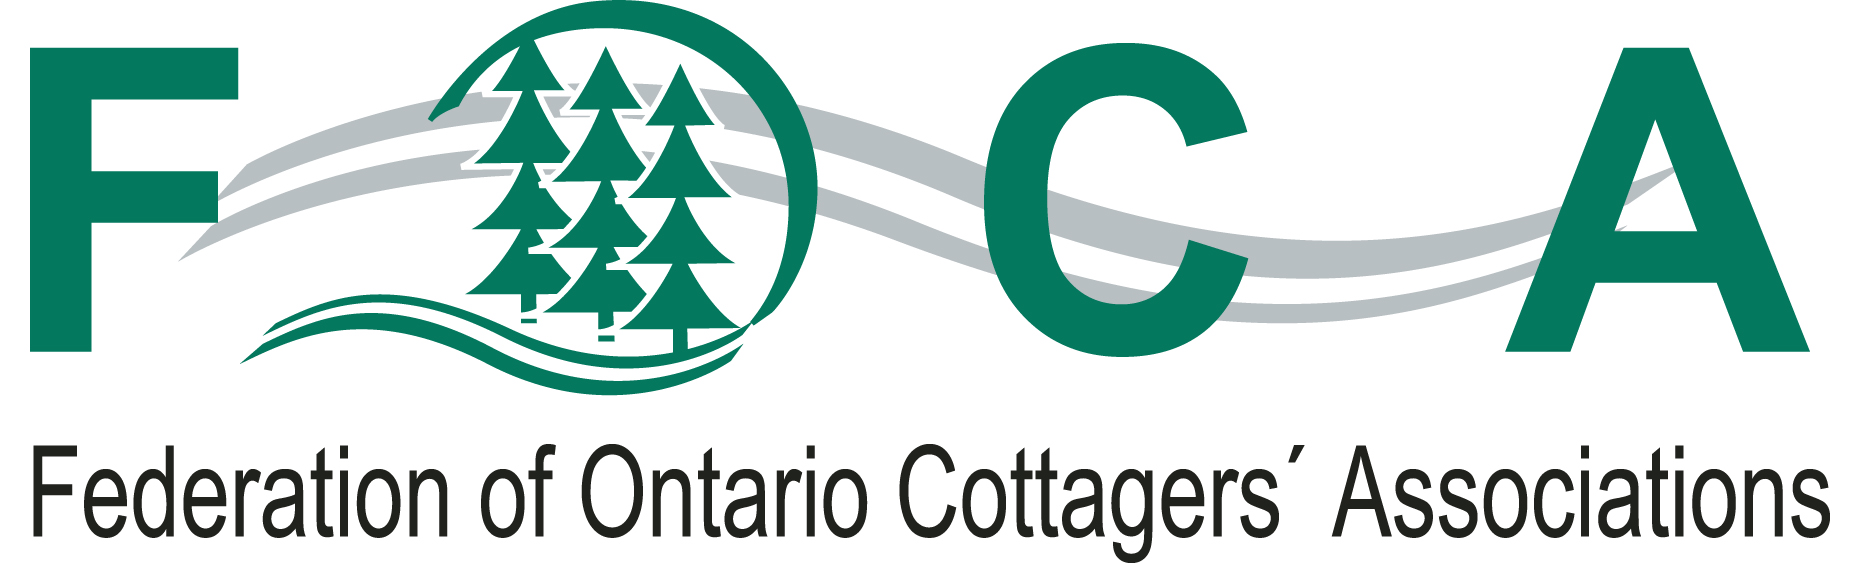 Federation of Ontario Cottagers Associations